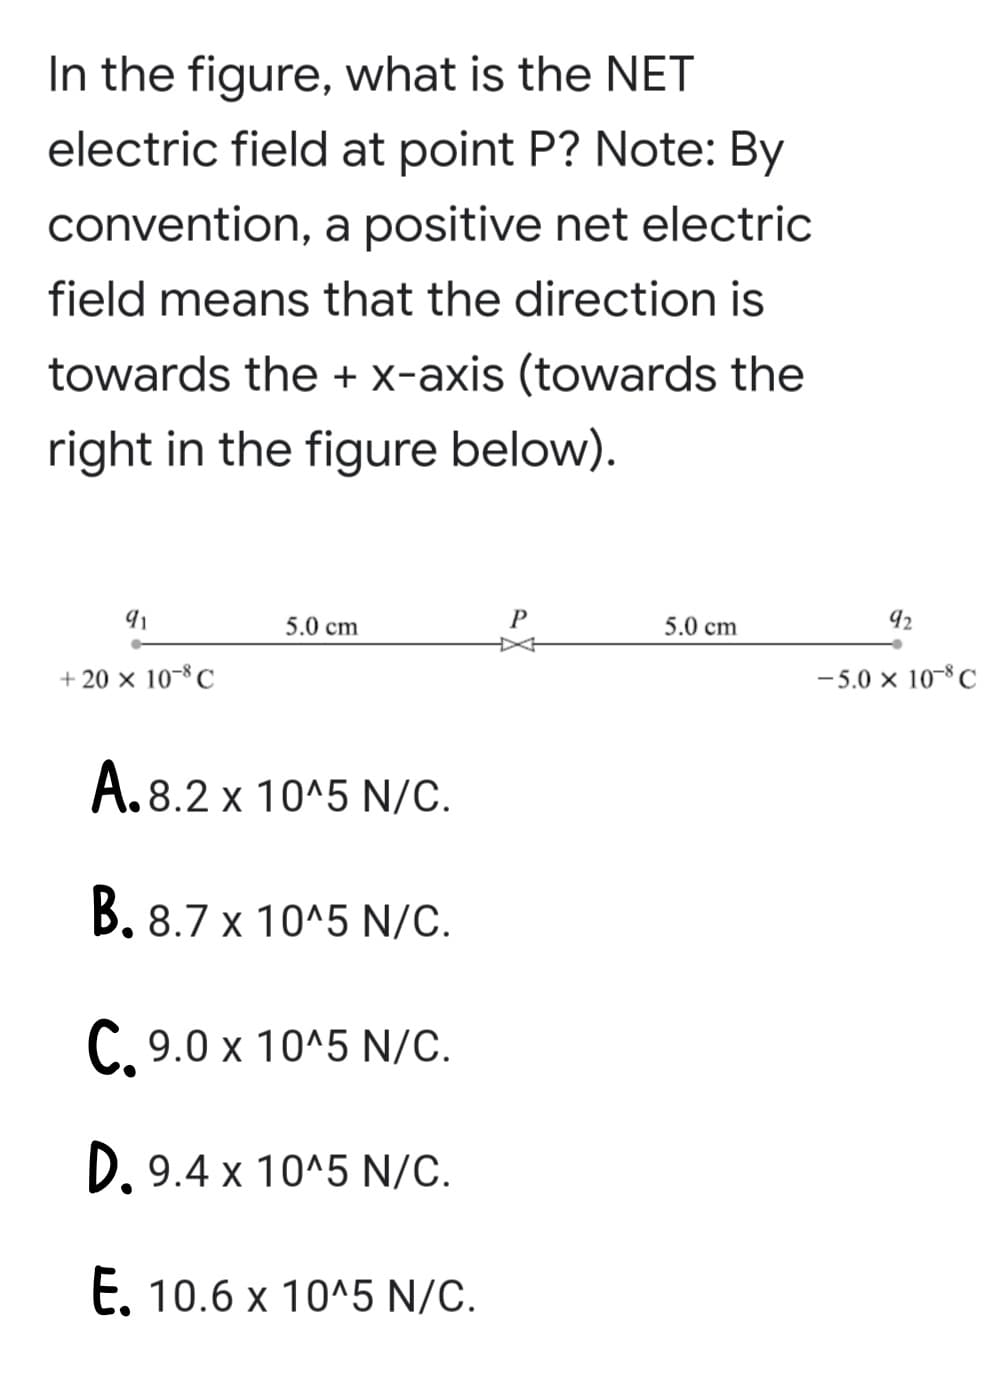 In the figure, what is the NET
electric field at point P? Note: By
convention, a positive net electric
field means that the direction is
towards the + x-axis (towards the
right in the figure below).
5.0 cm
5.0 cm
92
+ 20 × 10-8 C
- 5.0 x 10-8 C
A. 8.2 x 10^5 N/c.
B. 8.7 x 10^5 N/C.
C. 9.0 x 10^5 N/C.
D. 9.4 x 10^5 N/C.
E. 10.6 x 10^5 N/C.
